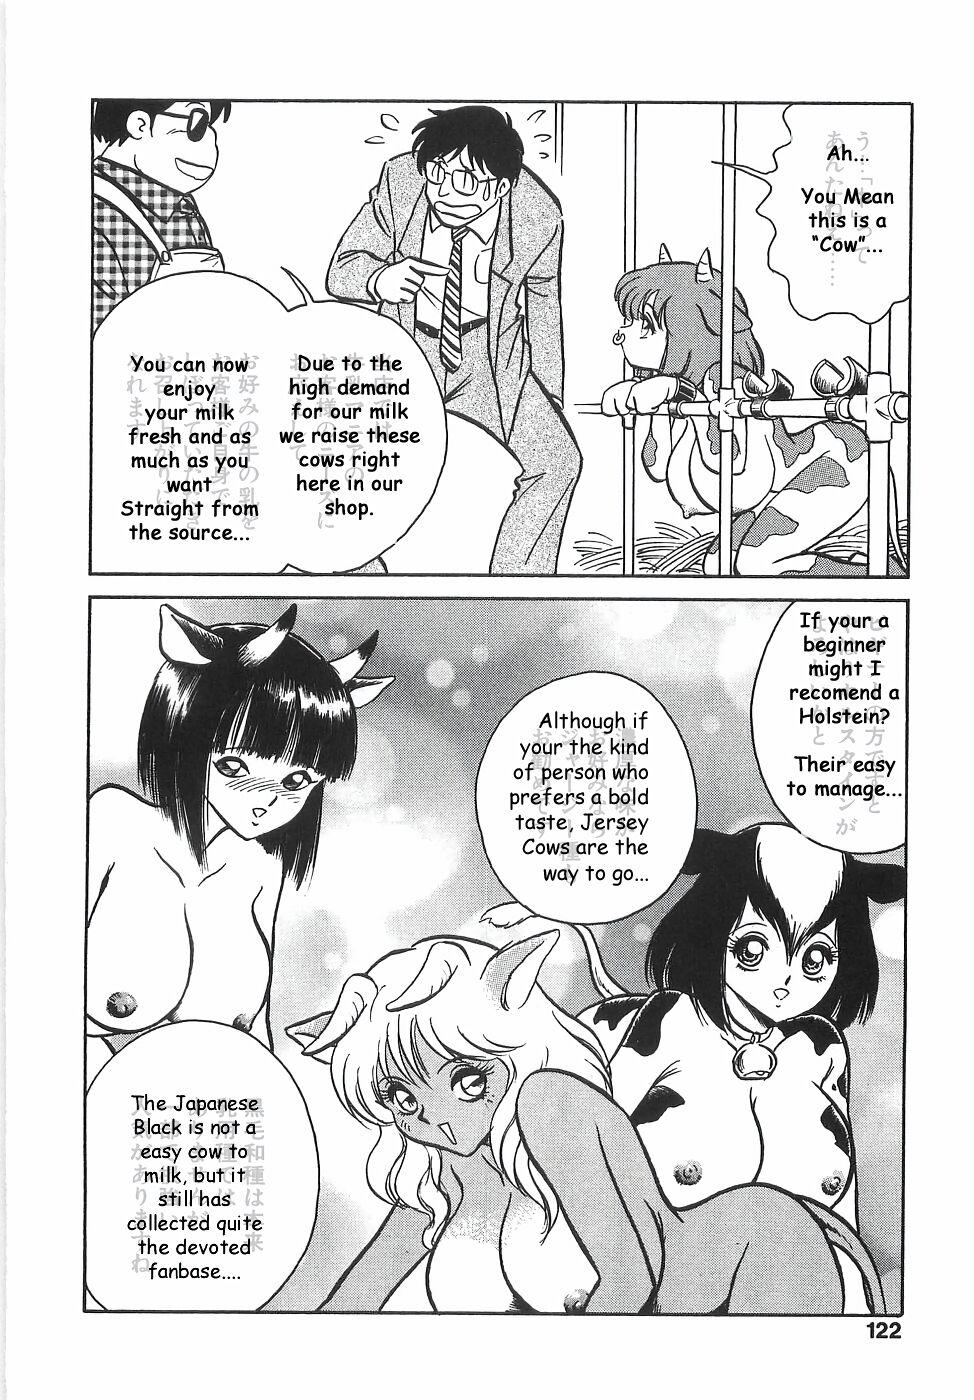 Blowjobs Want Milk? Reversecowgirl - Page 6